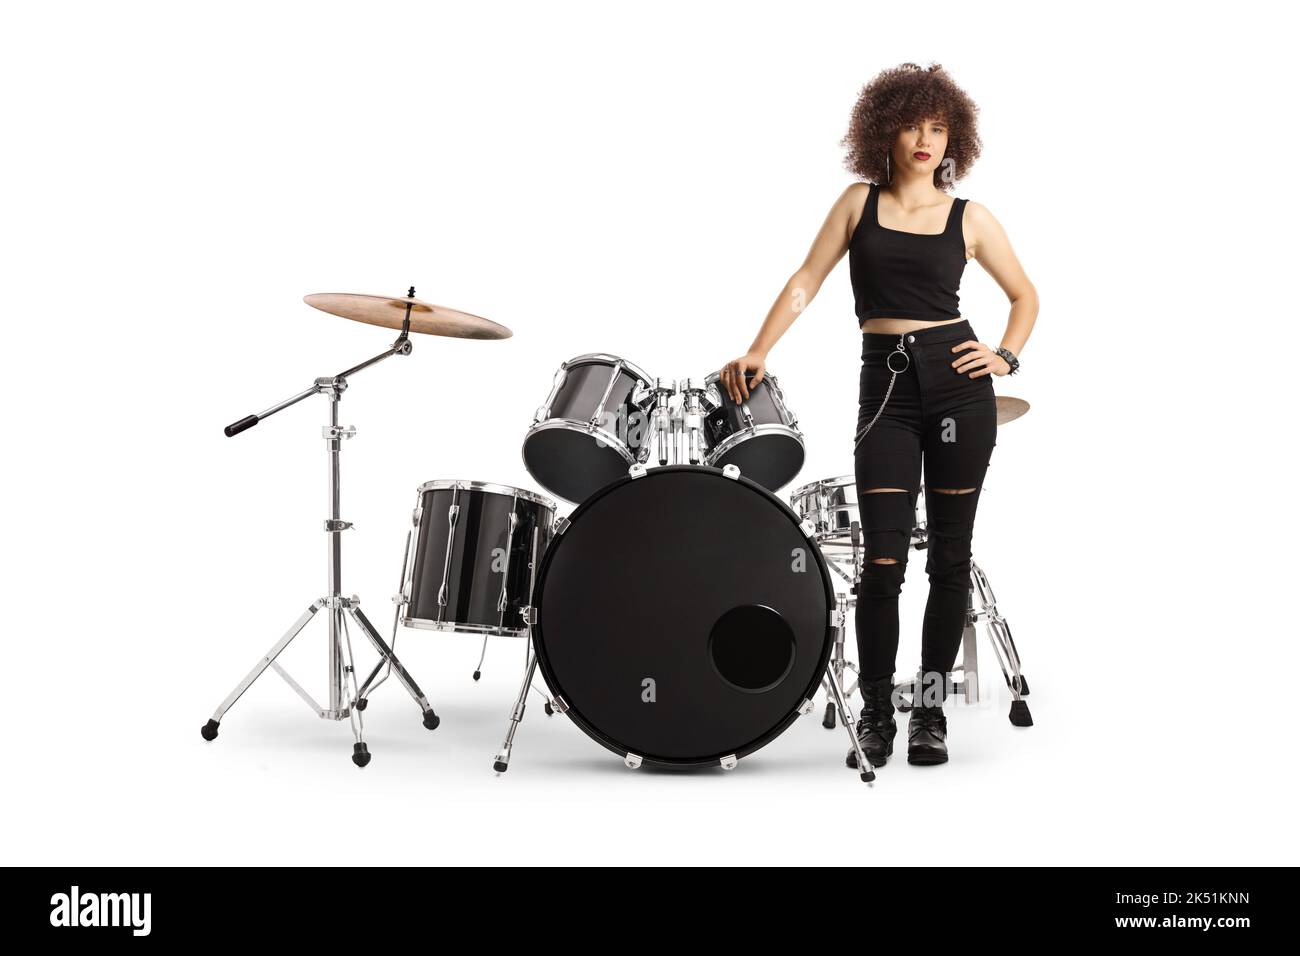 Young female drummer standing next to a drum kit isolated on white background Stock Photo